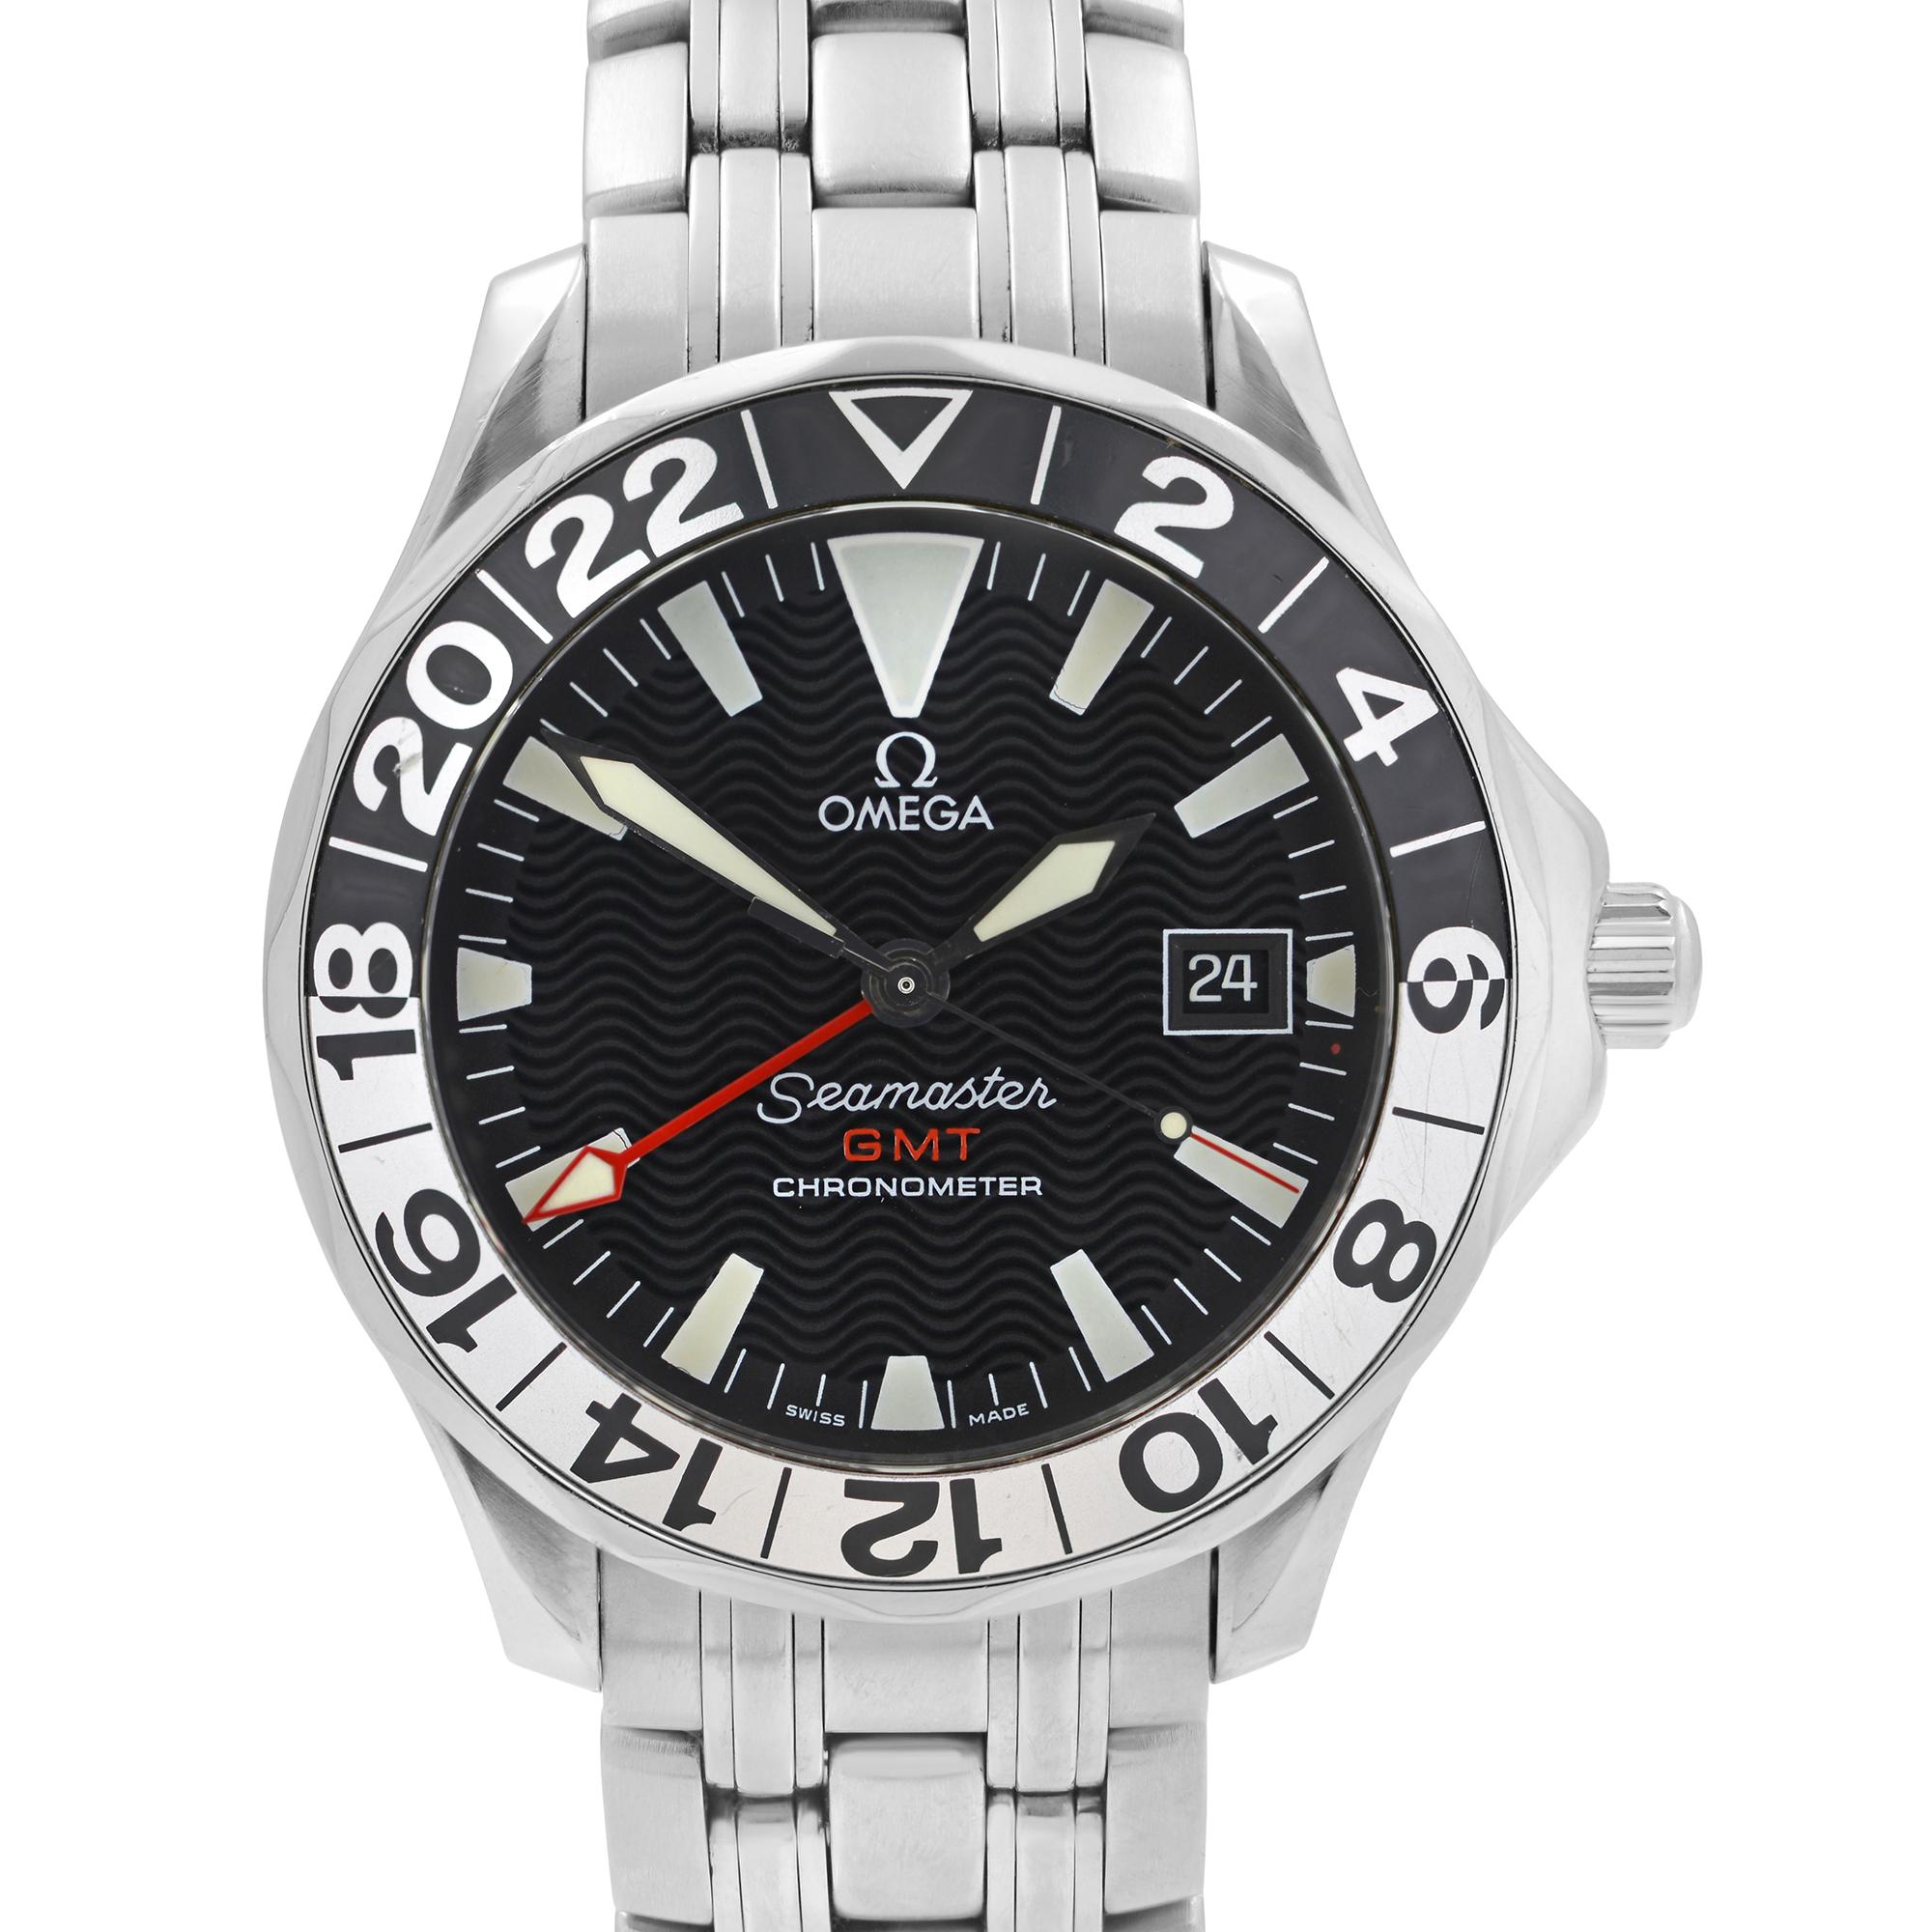 Pre Owned Omega Seamaster GMT Steel Black Dial Automatic Men's Watch 2534.50.00. This Beautiful Timepiece is Powered by Mechanical (Automatic) Movement And Features: Round Stainless Steel Case with a Stainless Steel Bracelet, Bidirectional Rotating